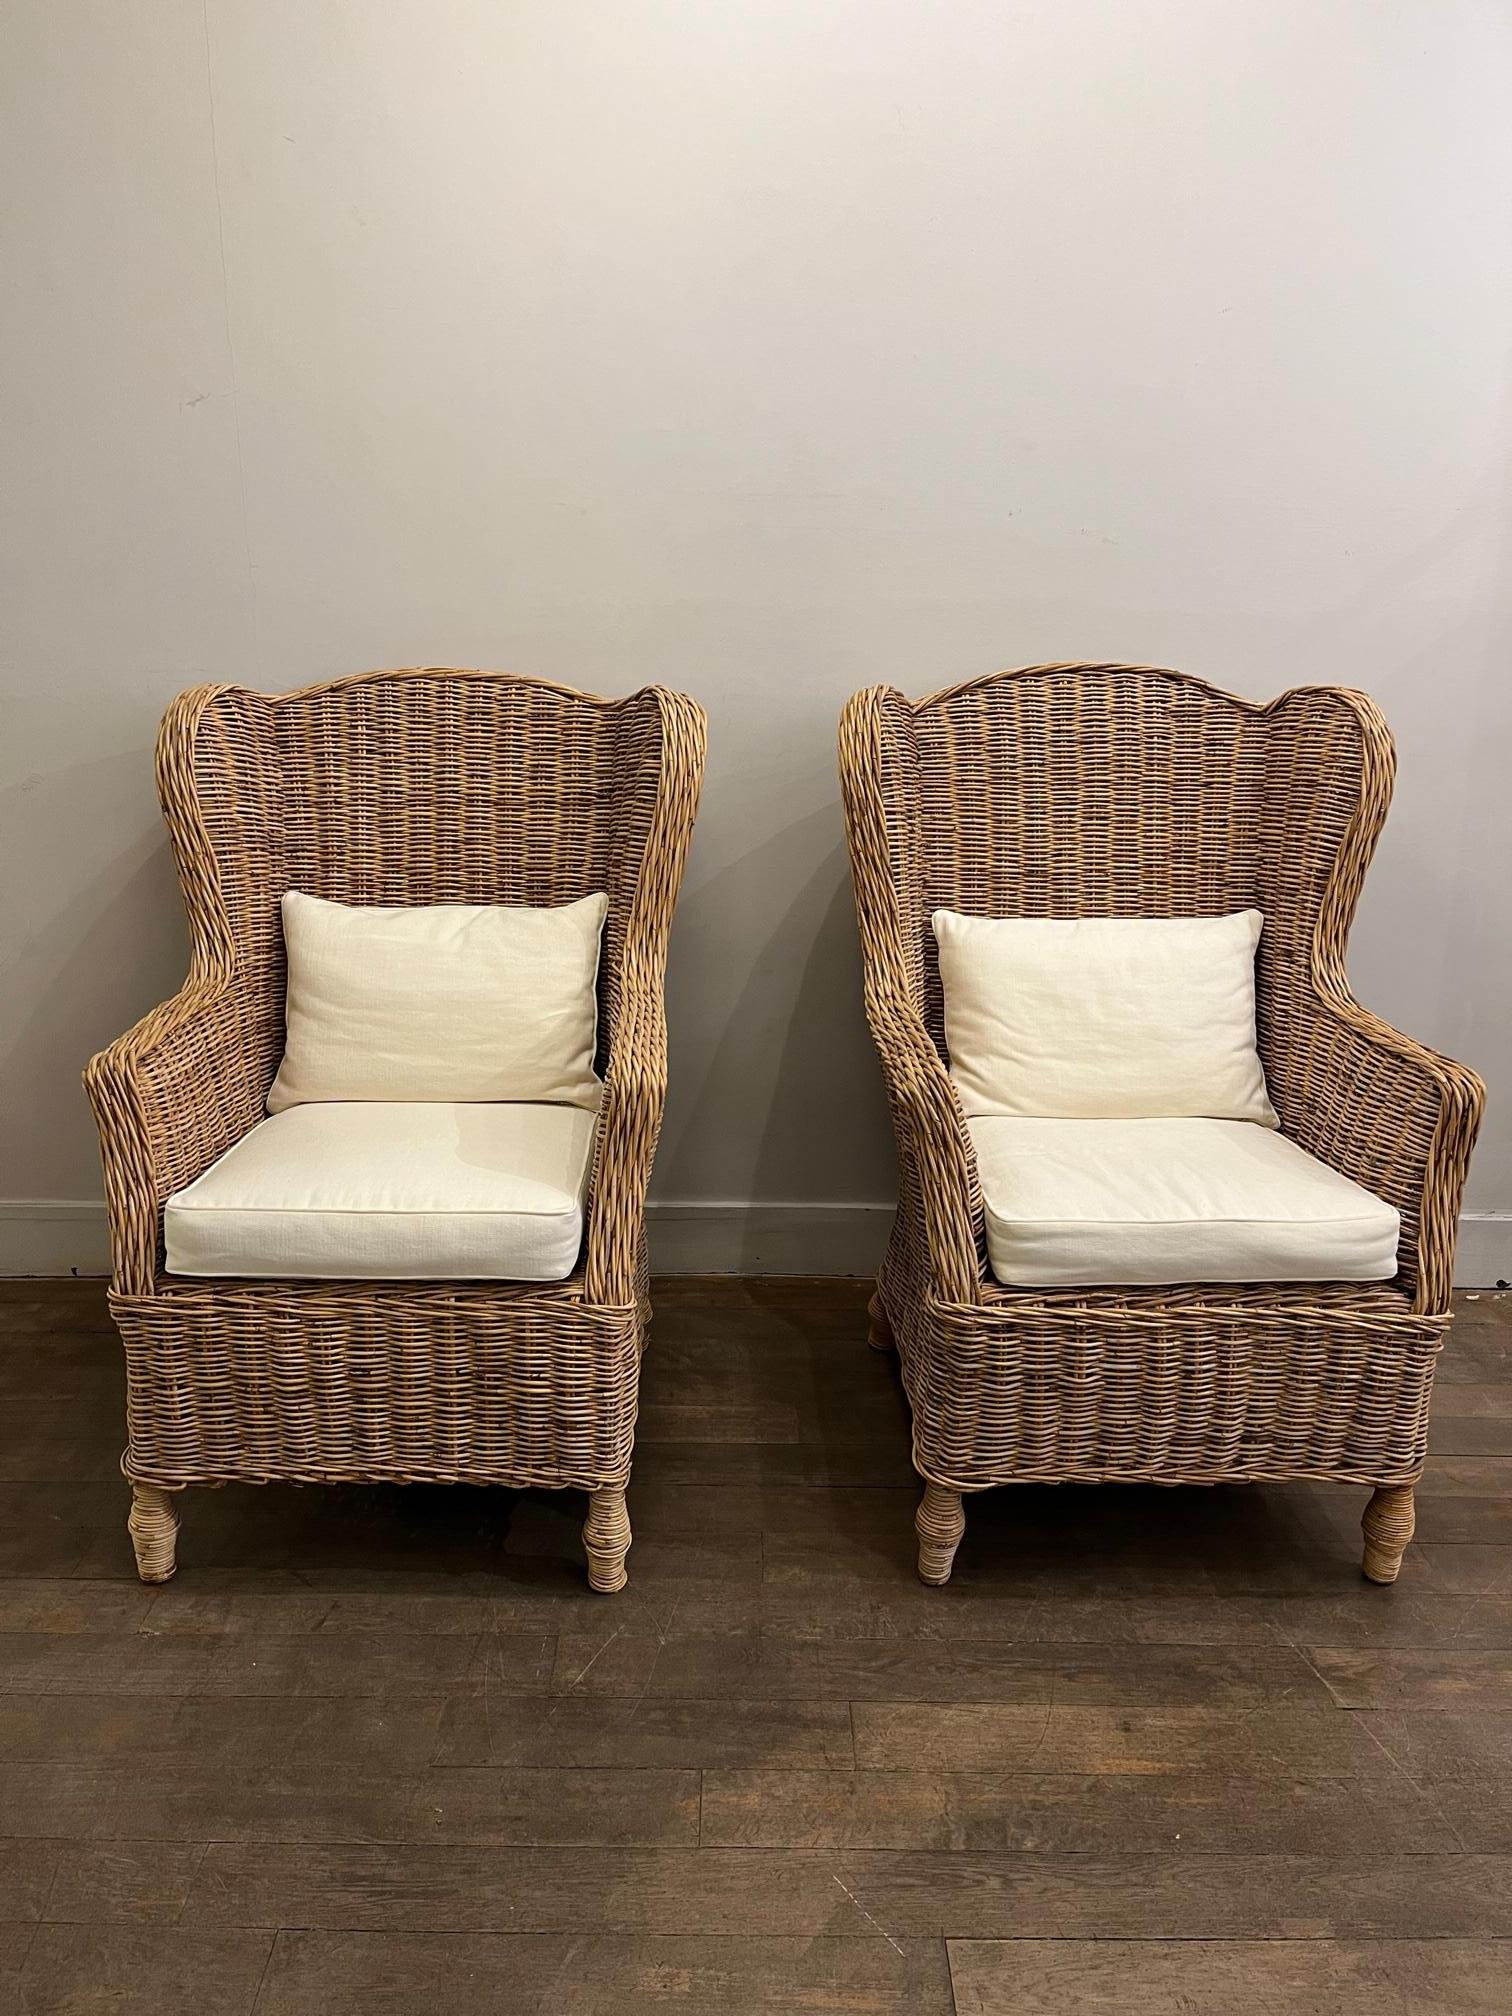 Pair of rattan high back wing chairs. 
White cotton cushion ( newly upholster ) 
France 1970

Dimensions, Measures: 

Hauteur / Height : 107 cm / 42.51 inch
Hauteur d’assise / Seating height : 50 cm / 19.68 inch 
Largeur / Width : 79 cm /